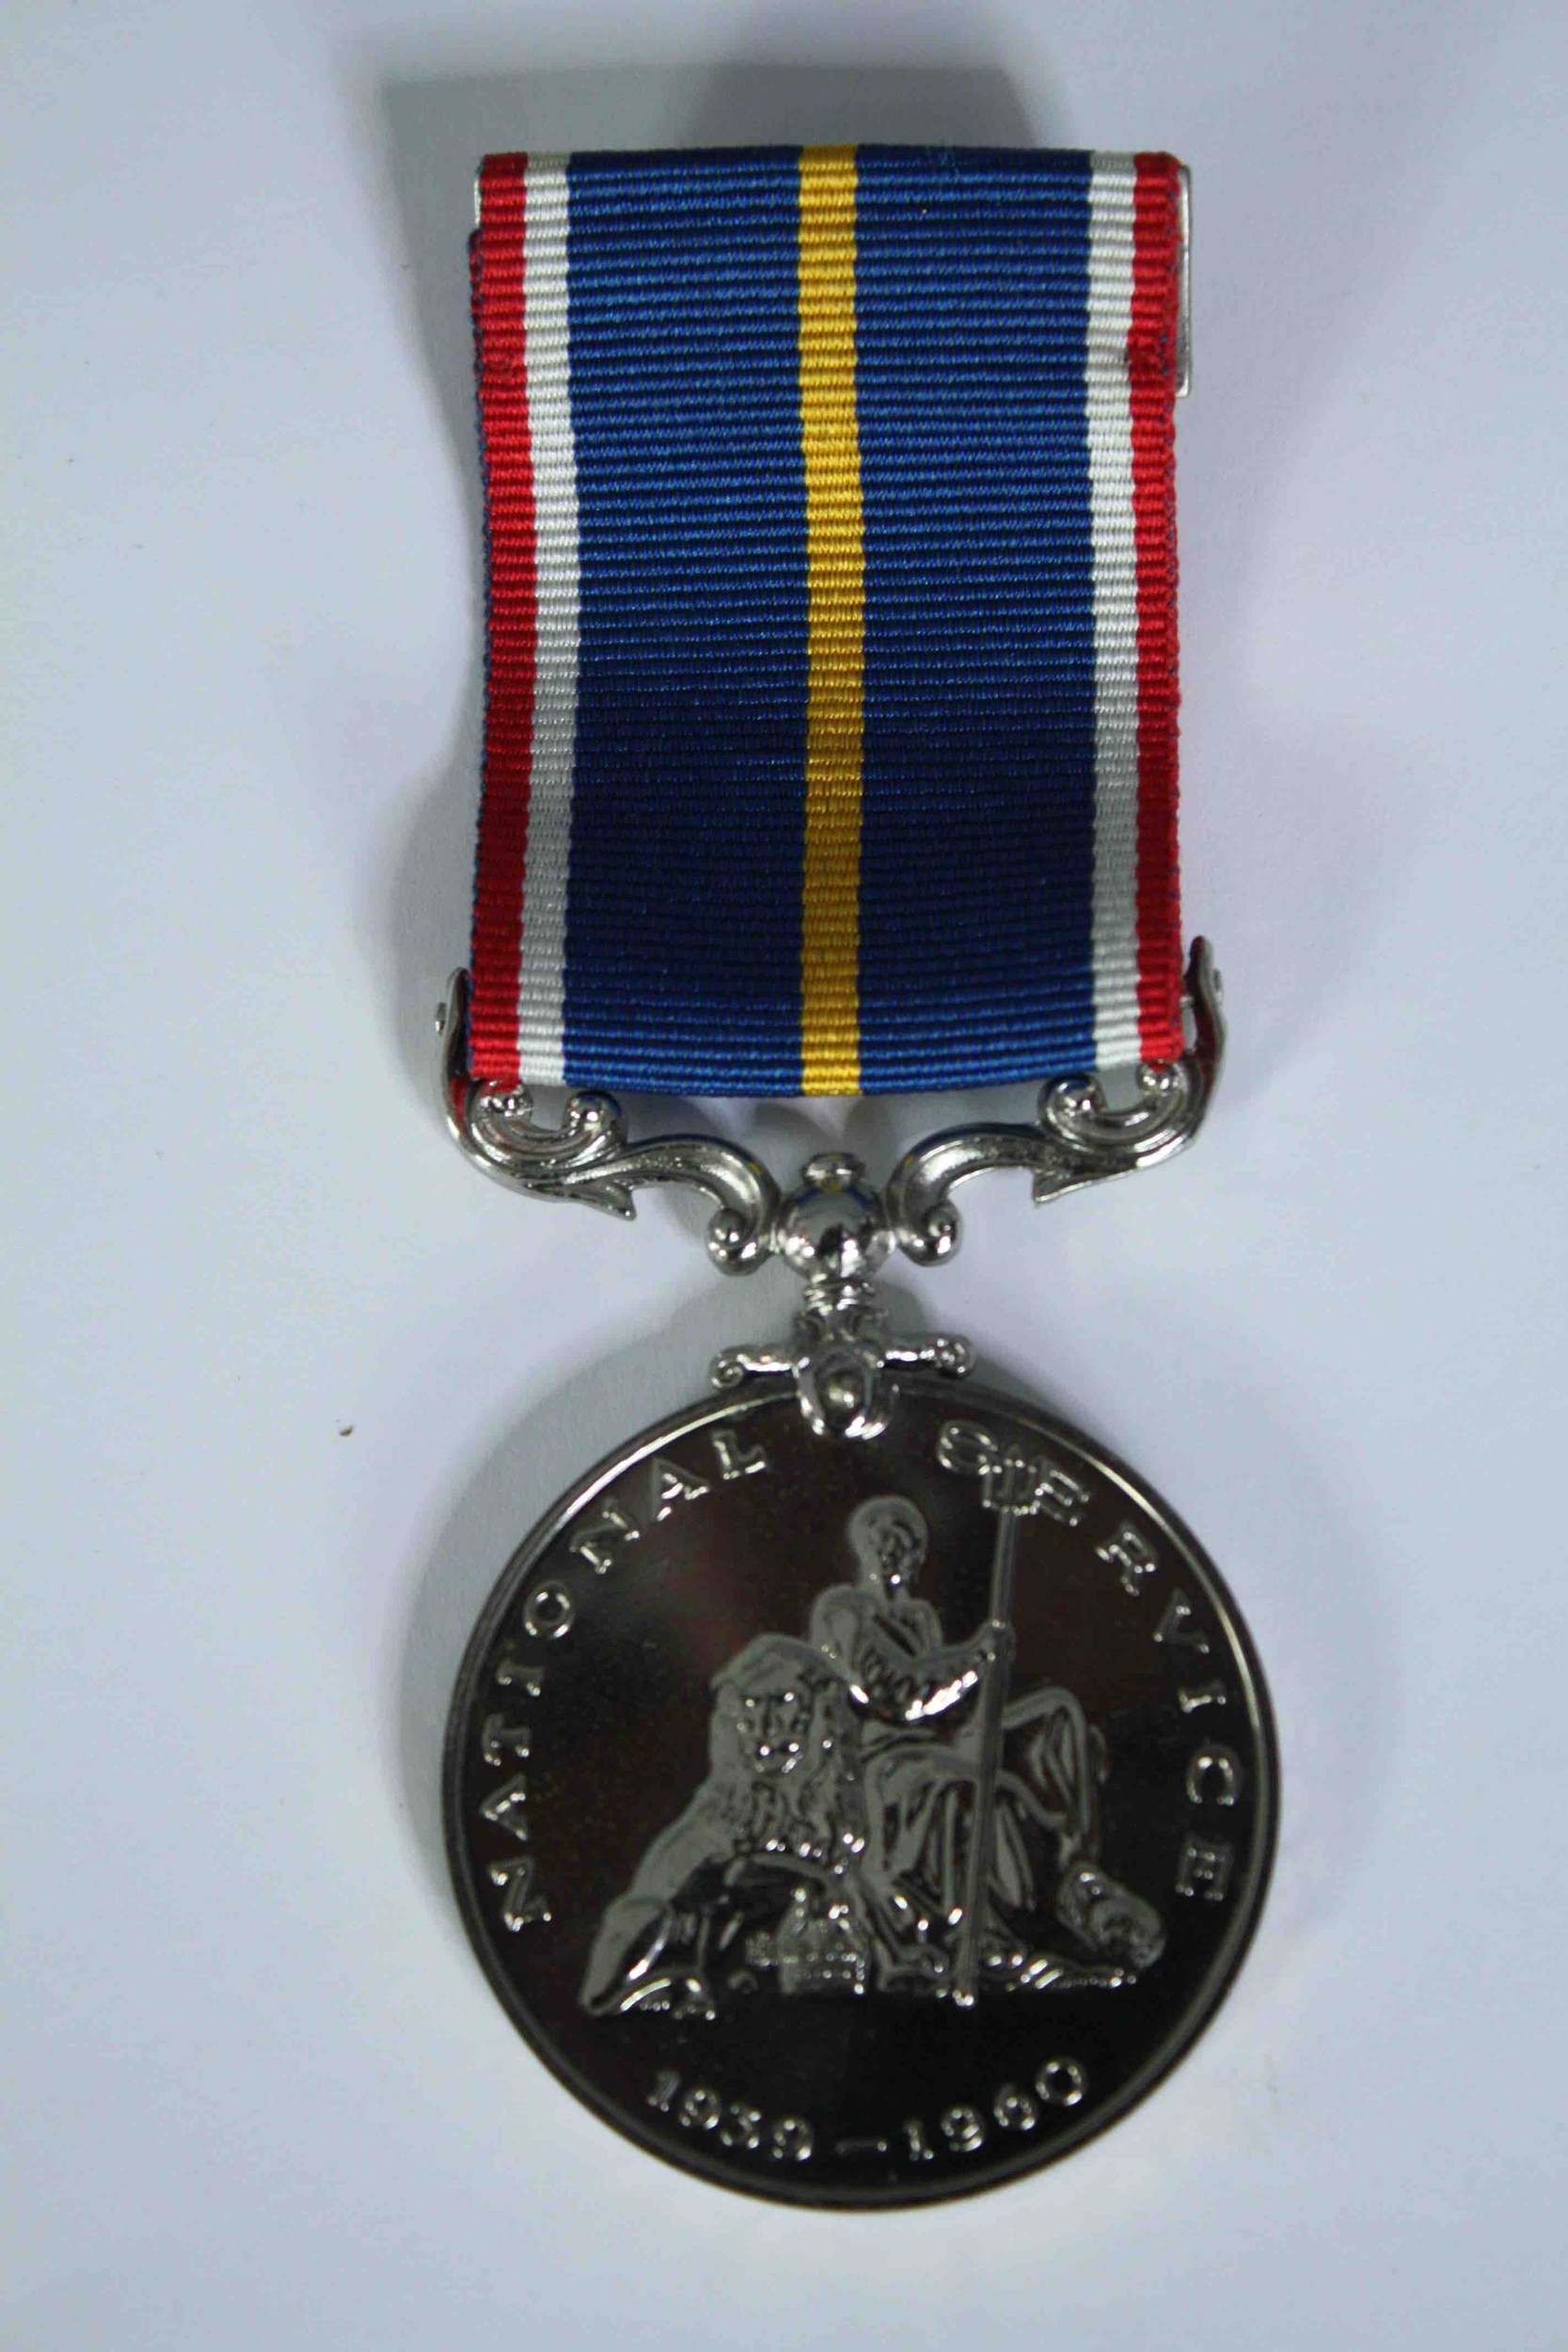 National Service Medal. 1939 - 1960. In presentation box with the royal crest to the inside of the